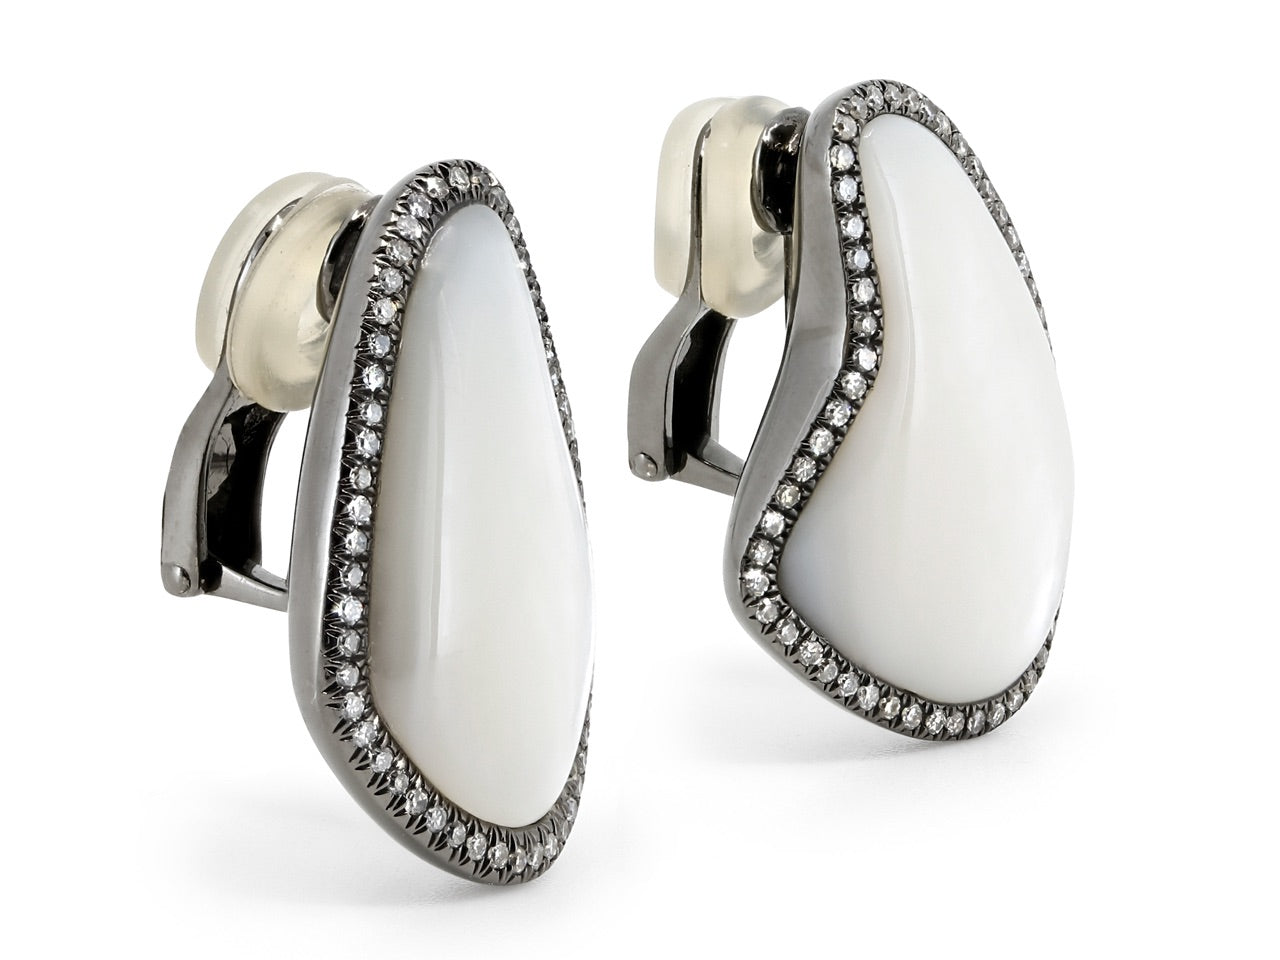 Mother-of-Pearl and Diamond Earrings in Blackened Gold